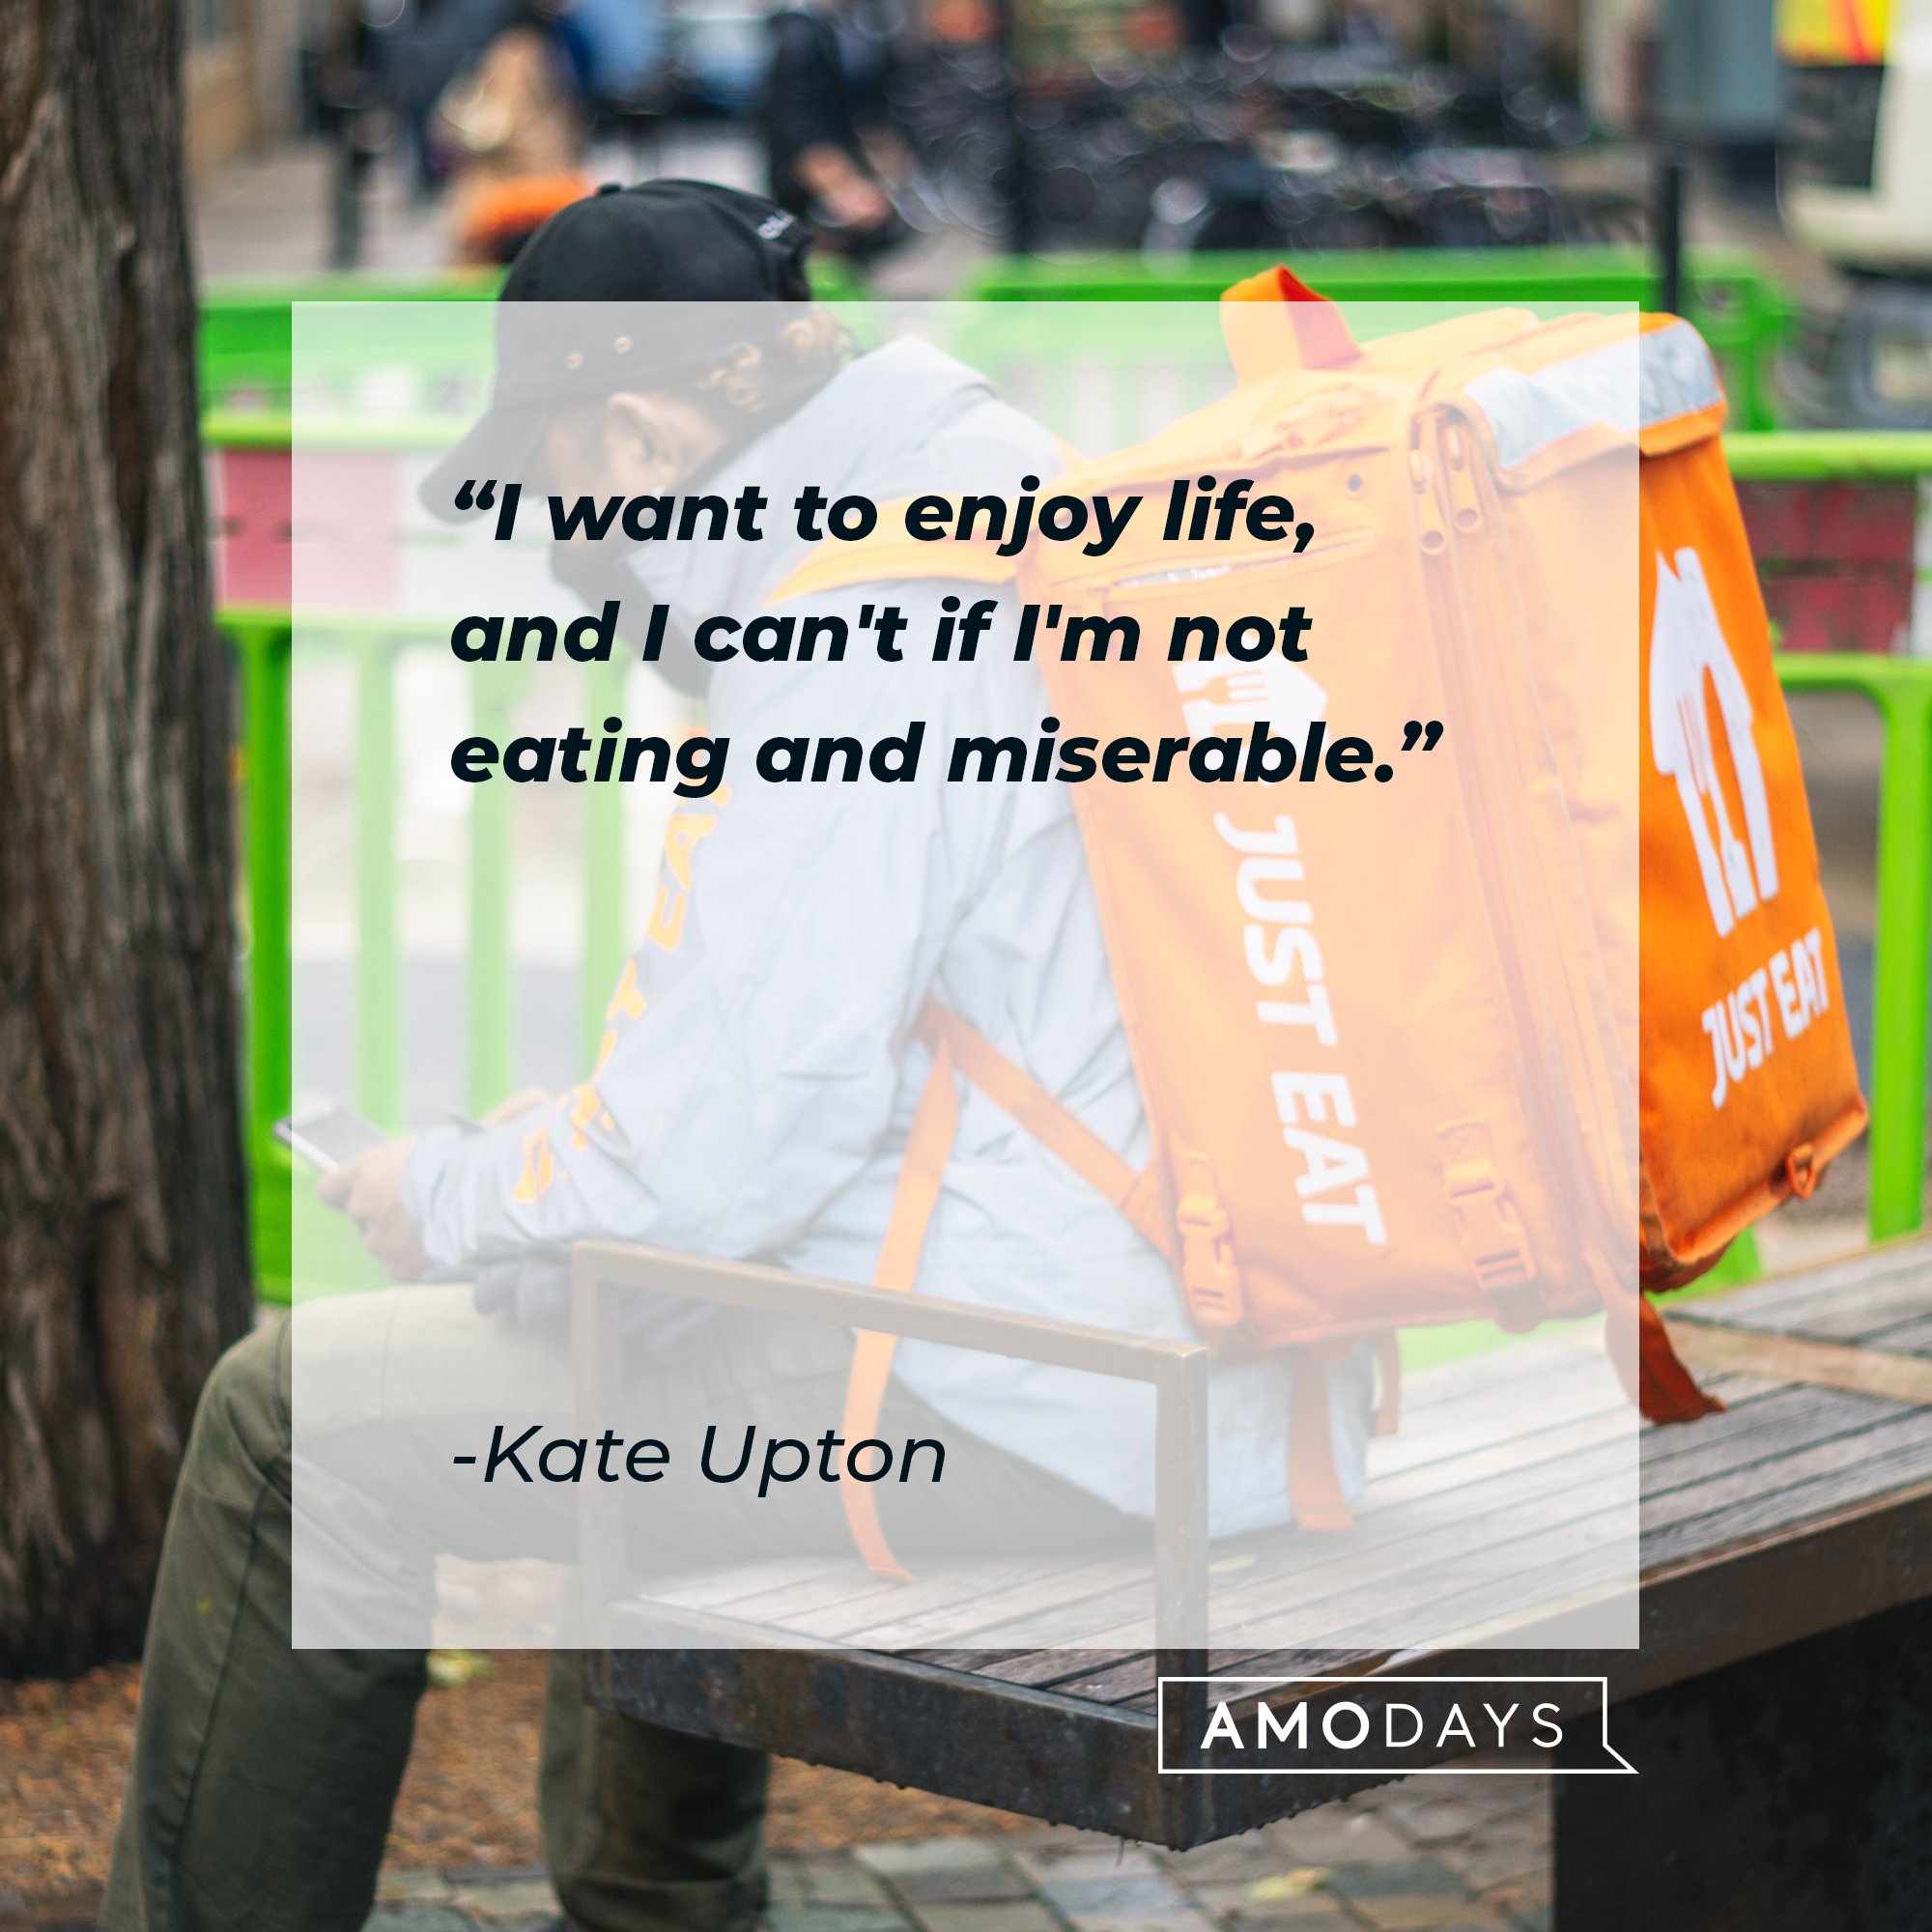 Kate Uptons’ quote: "I want to enjoy life, and I can't if I'm not eating and miserable." | Image: AmoDays